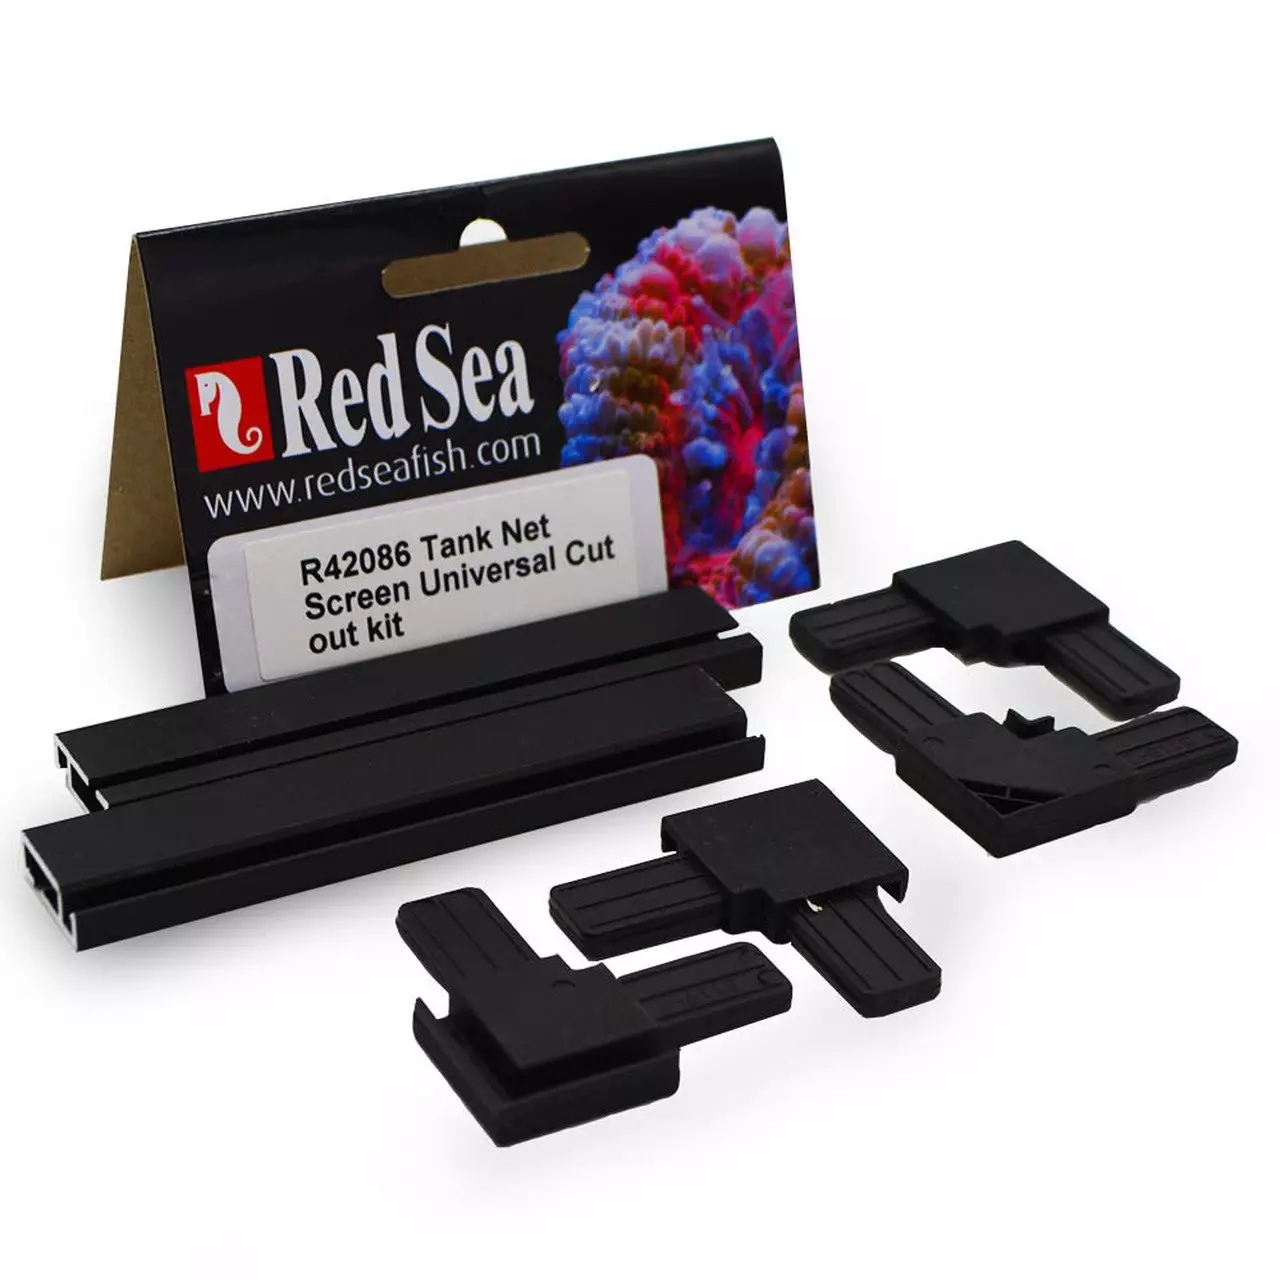 Red Sea black silicone filter cover for aquariums, with customizable aluminum frame and components for a perfect fit.